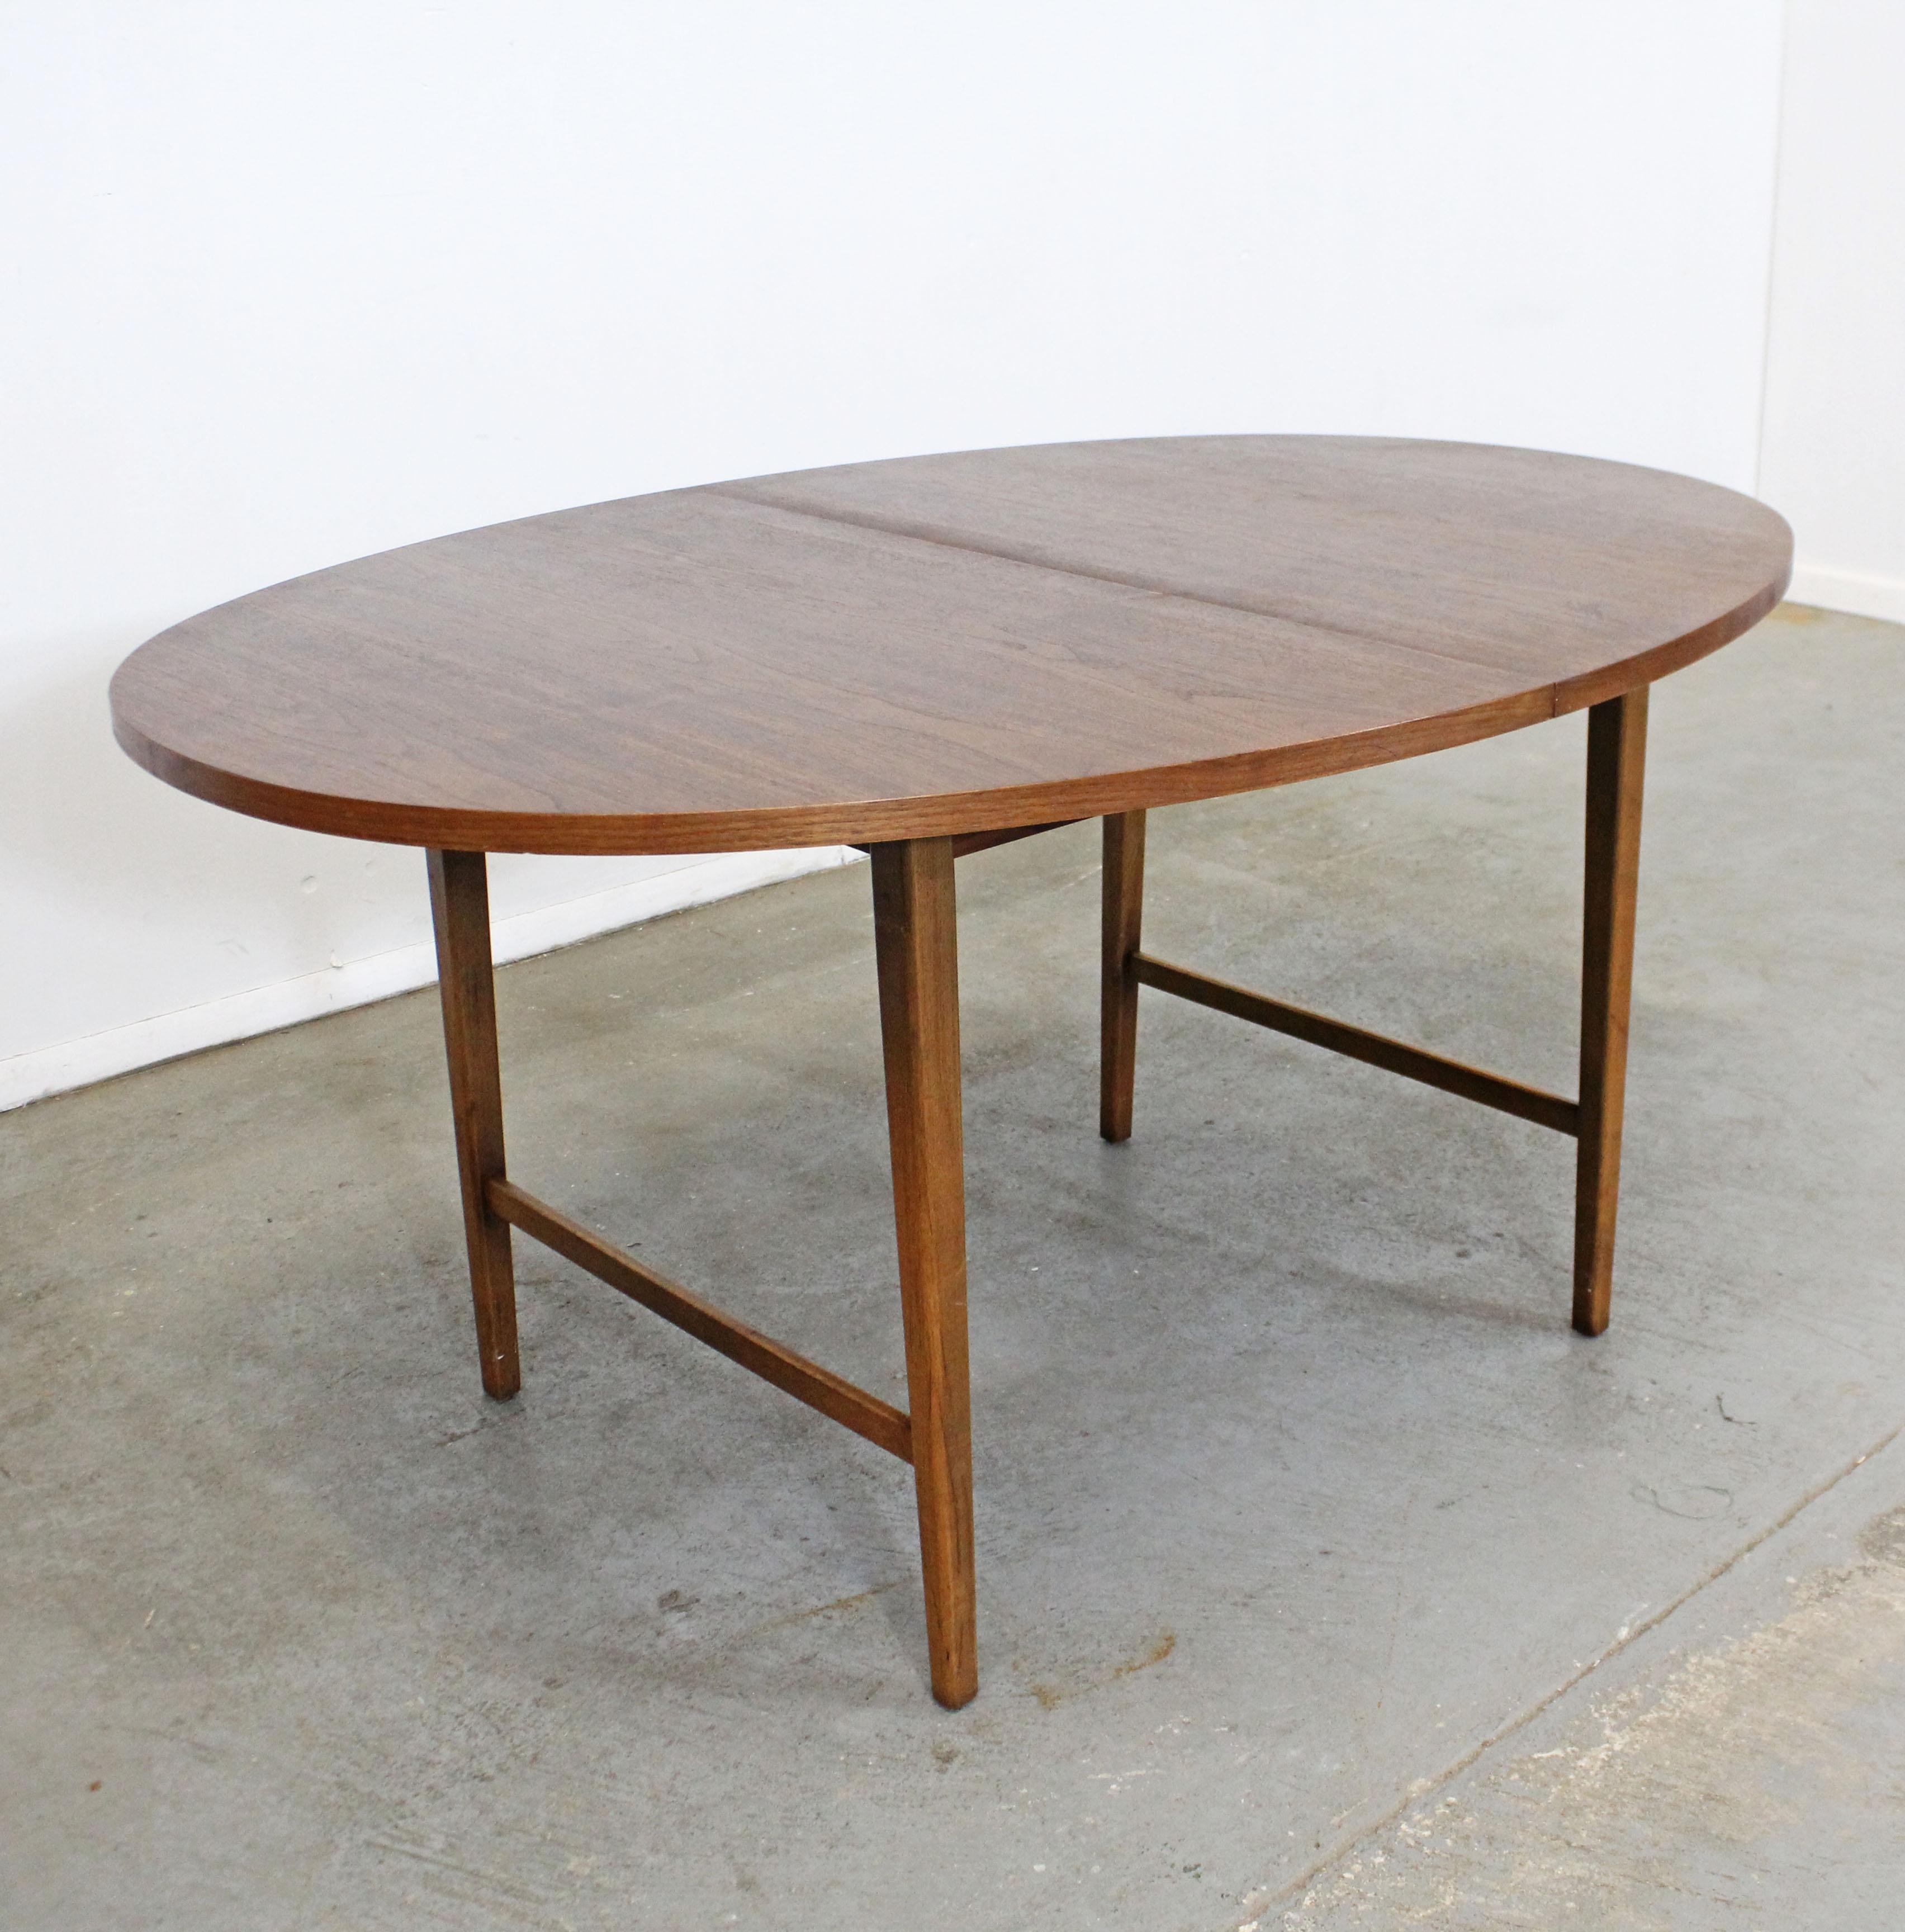 Offered is a round vintage Mid-Century Modern dining table attributed to Paul McCobb. This is a walnut dining table with a round top, includes one 12